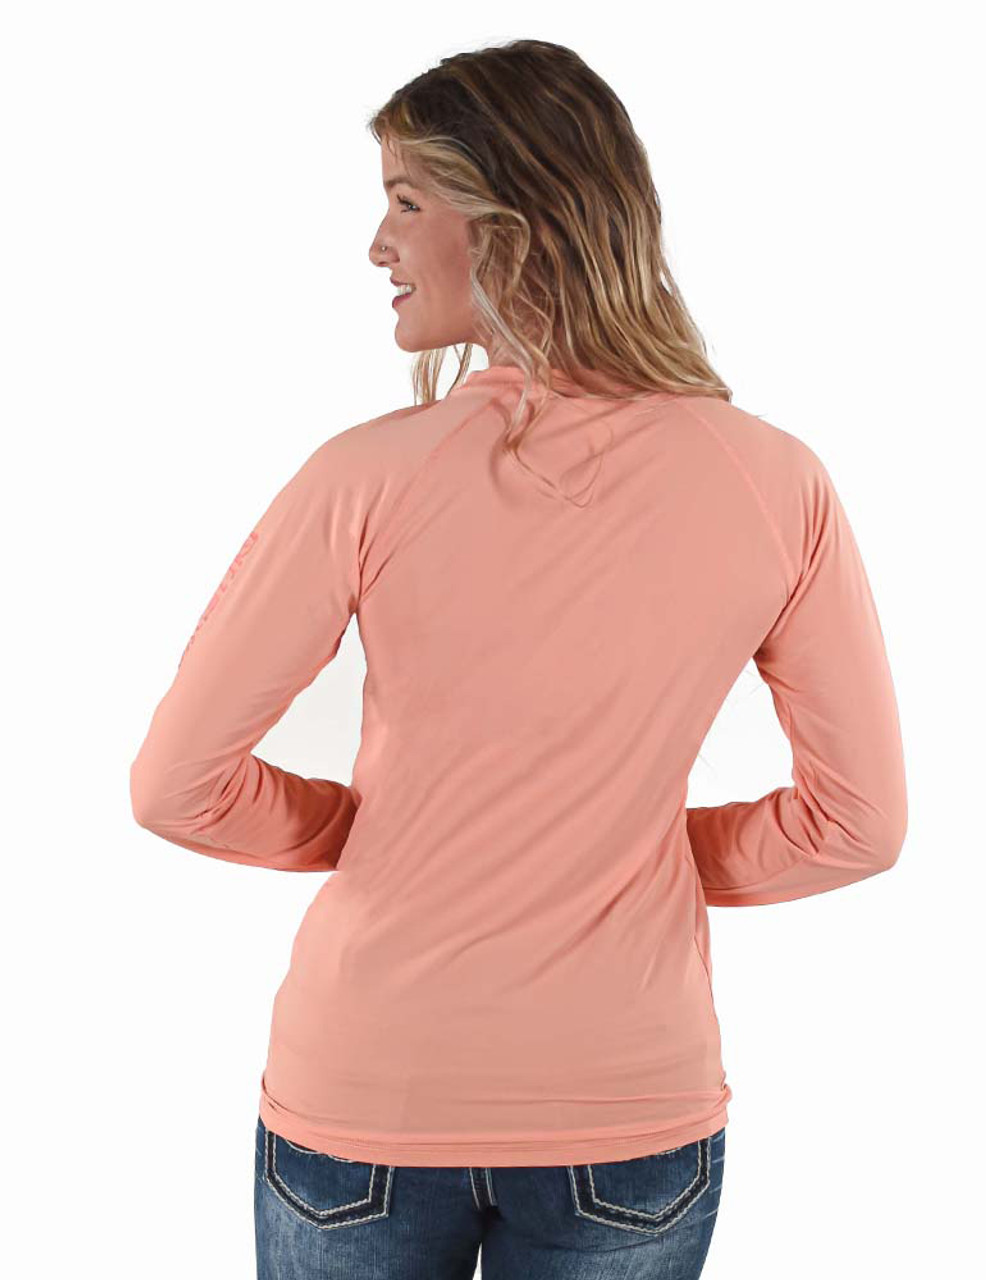 Long Sleeve Breathe Tee - Cowgirl Tuff Athletics 99 (coral with